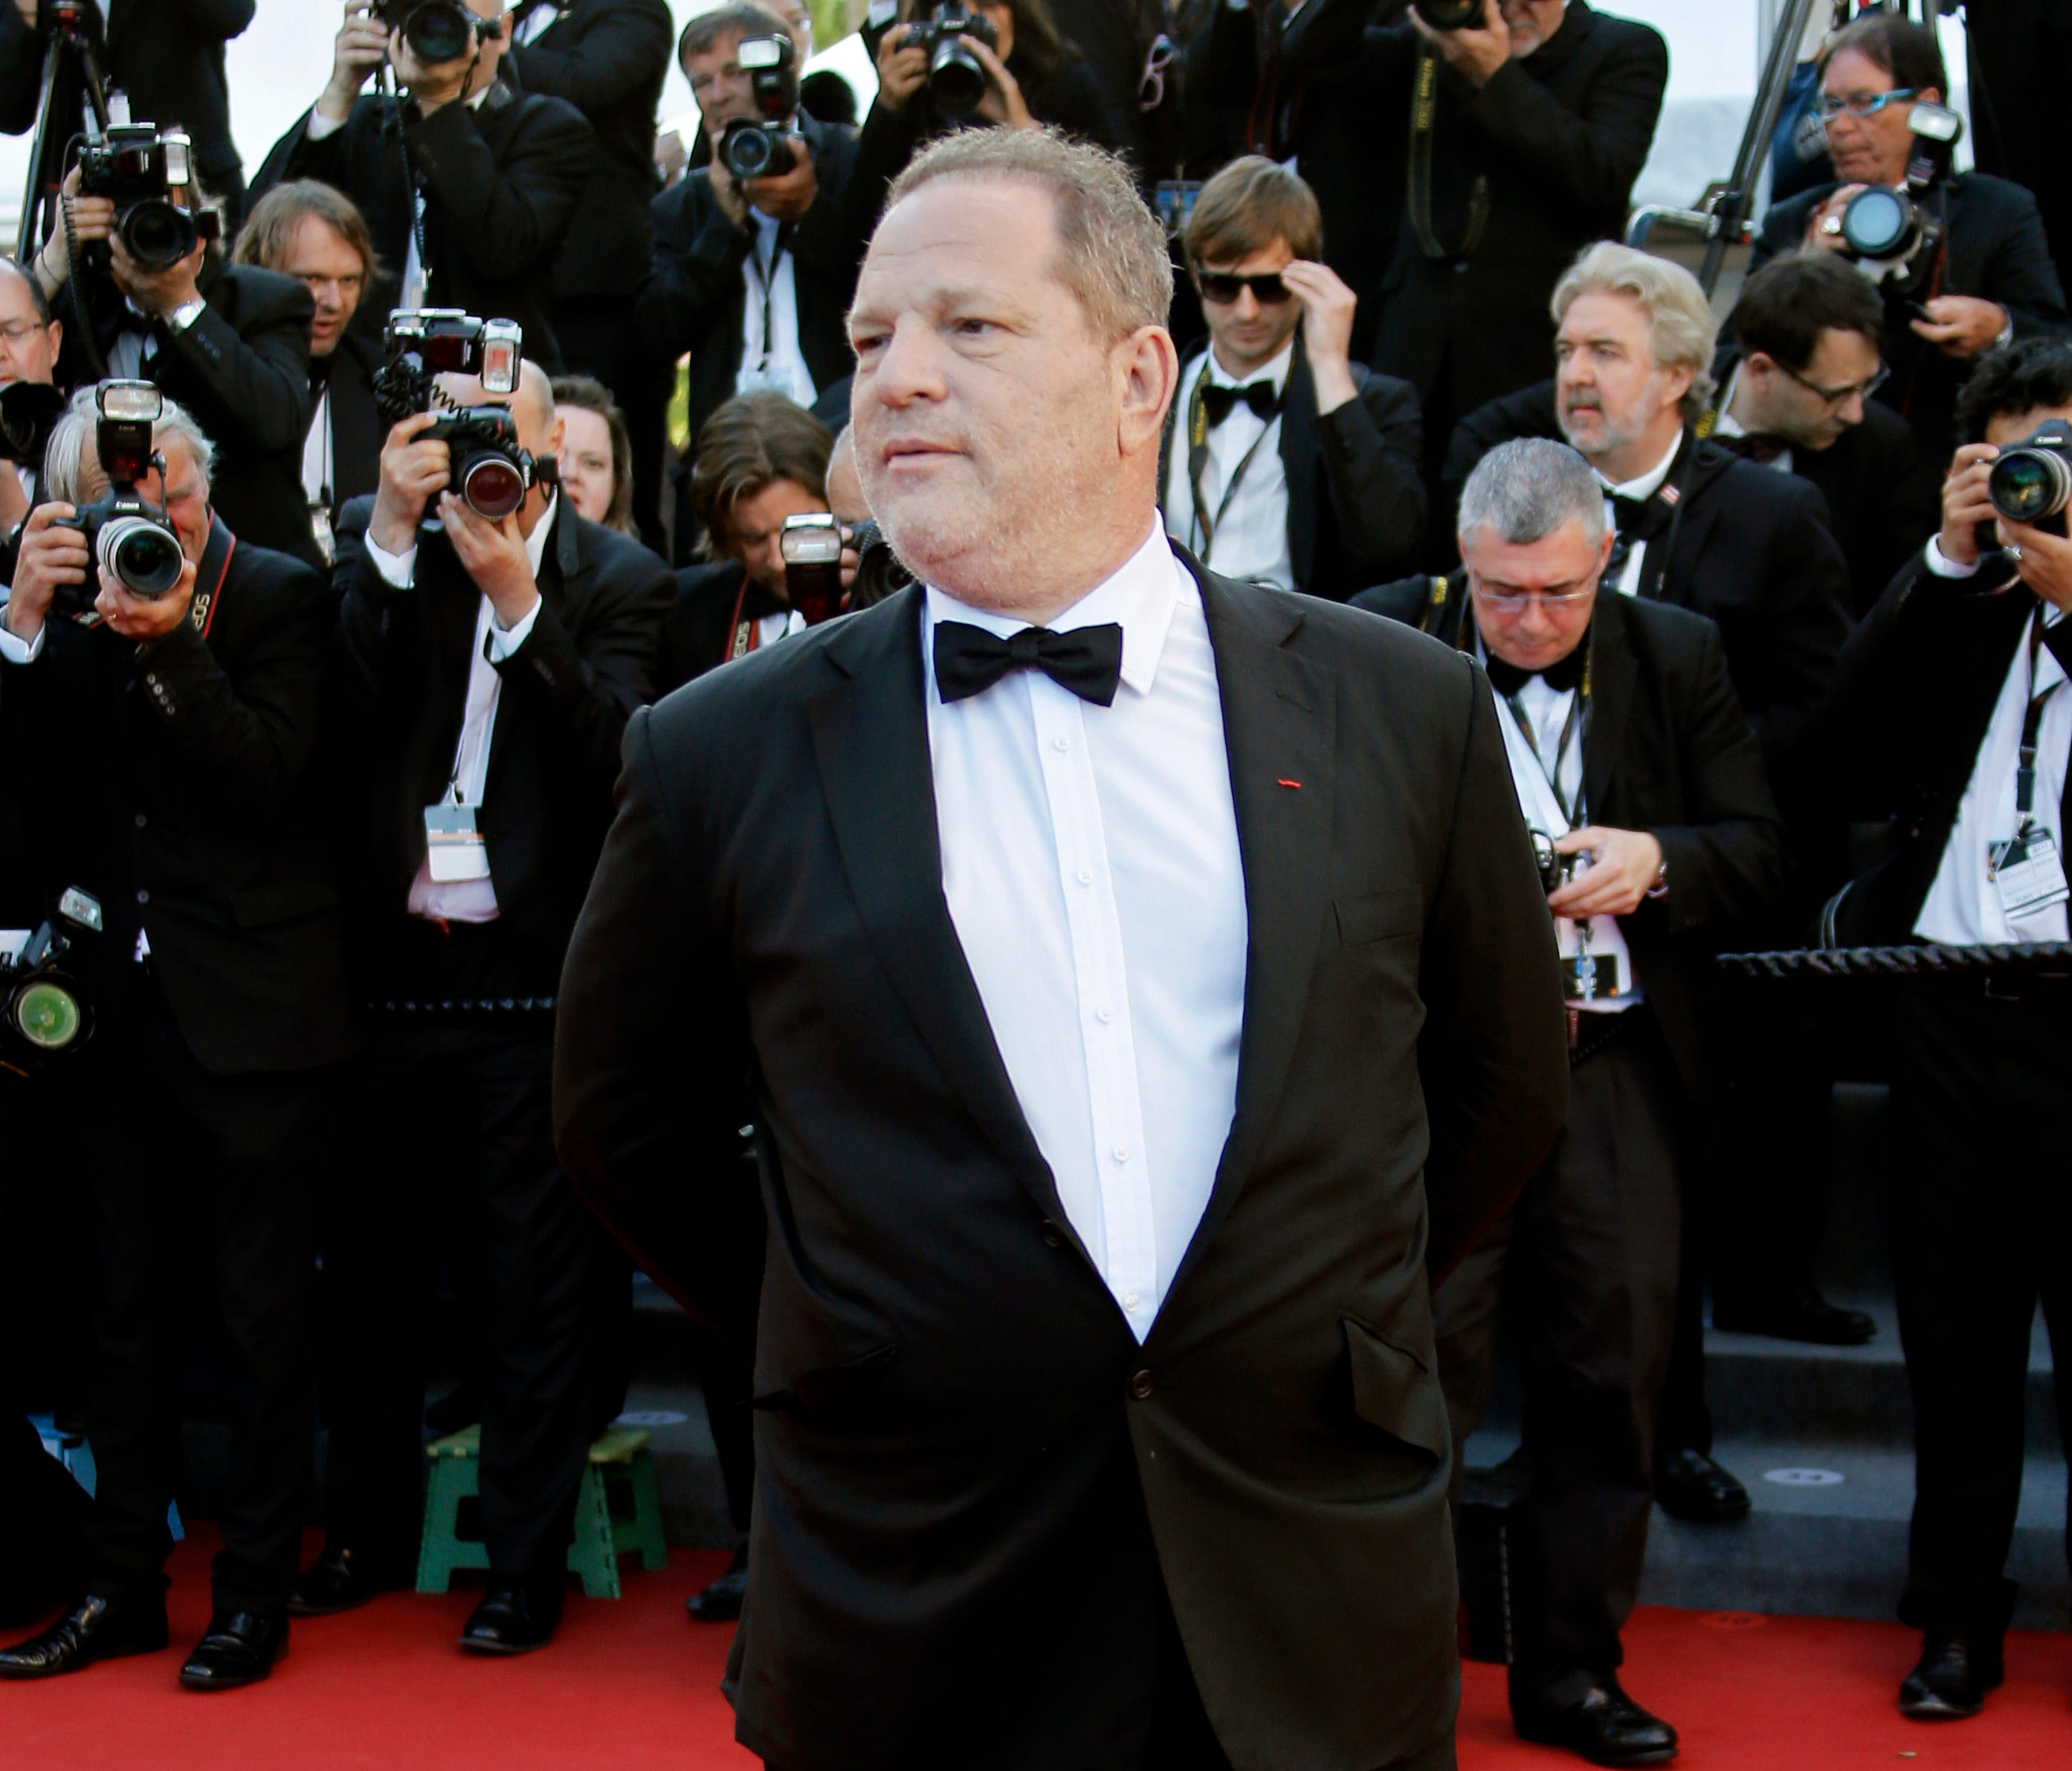 Multiple outlets report that disgraced Hollywood studio boss Harvey Weinstein, seen here at the 2013 Academy Awards, will surrender to authorities in New York Friday.